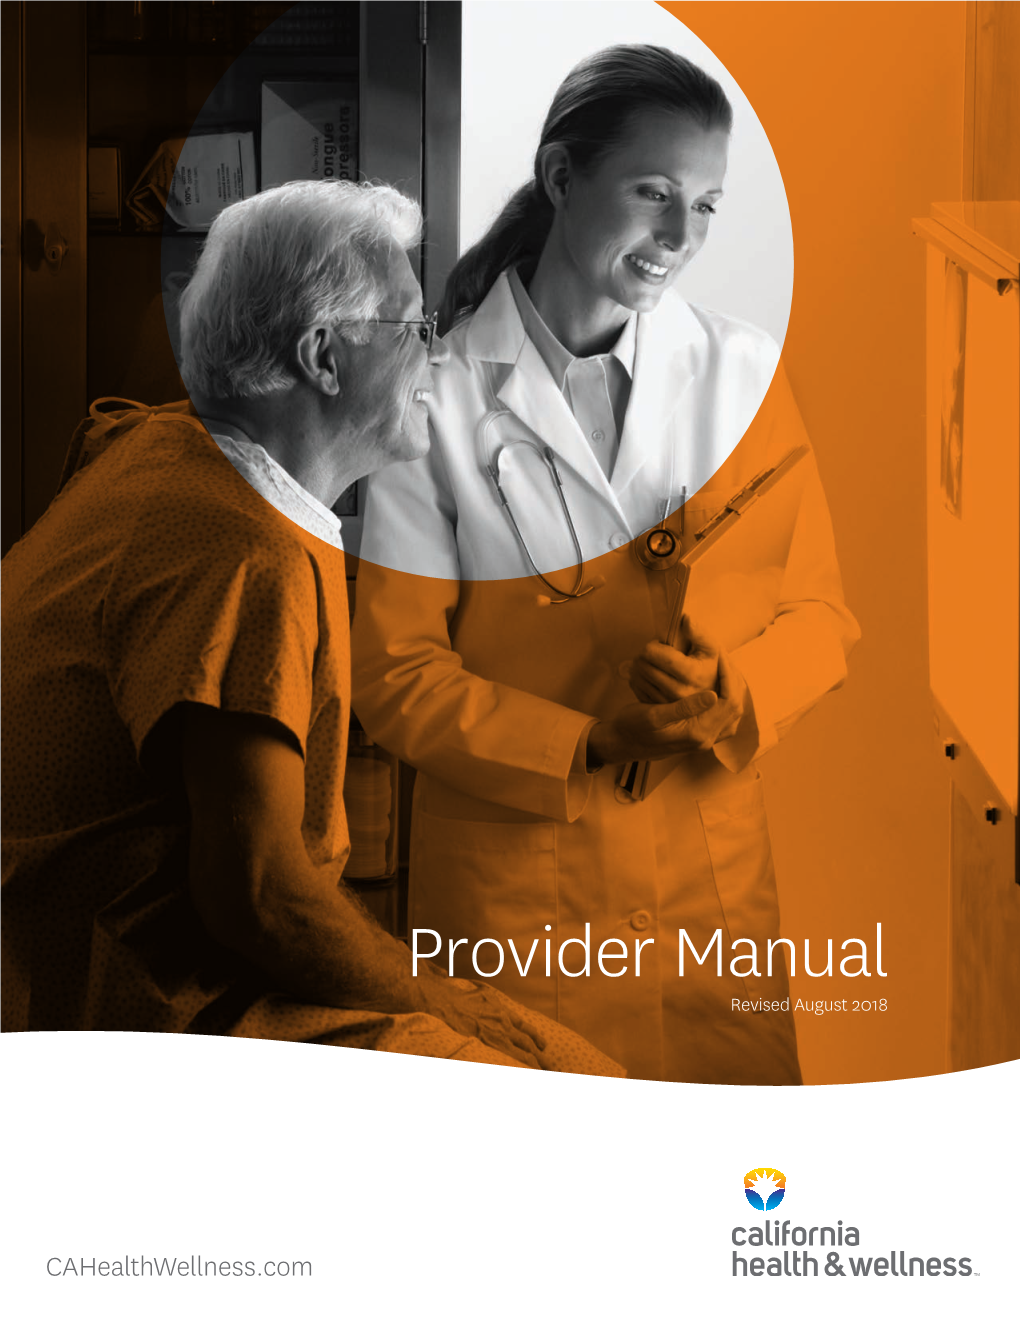 Provider Manual Revised August 2018